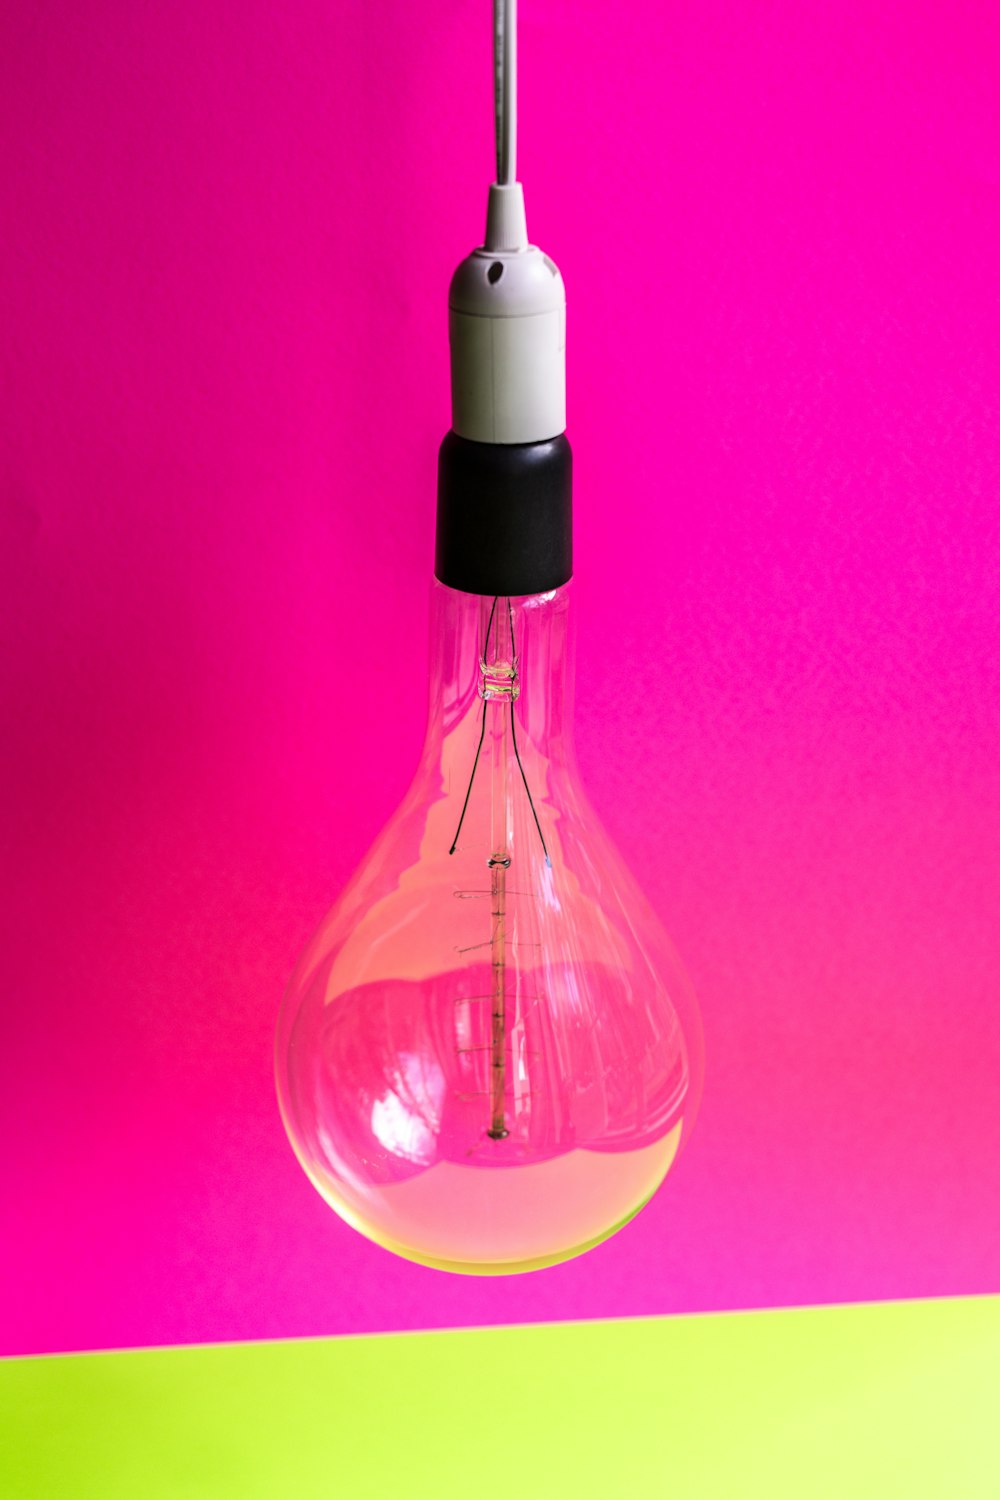 close-up photo of light bulb with pink background